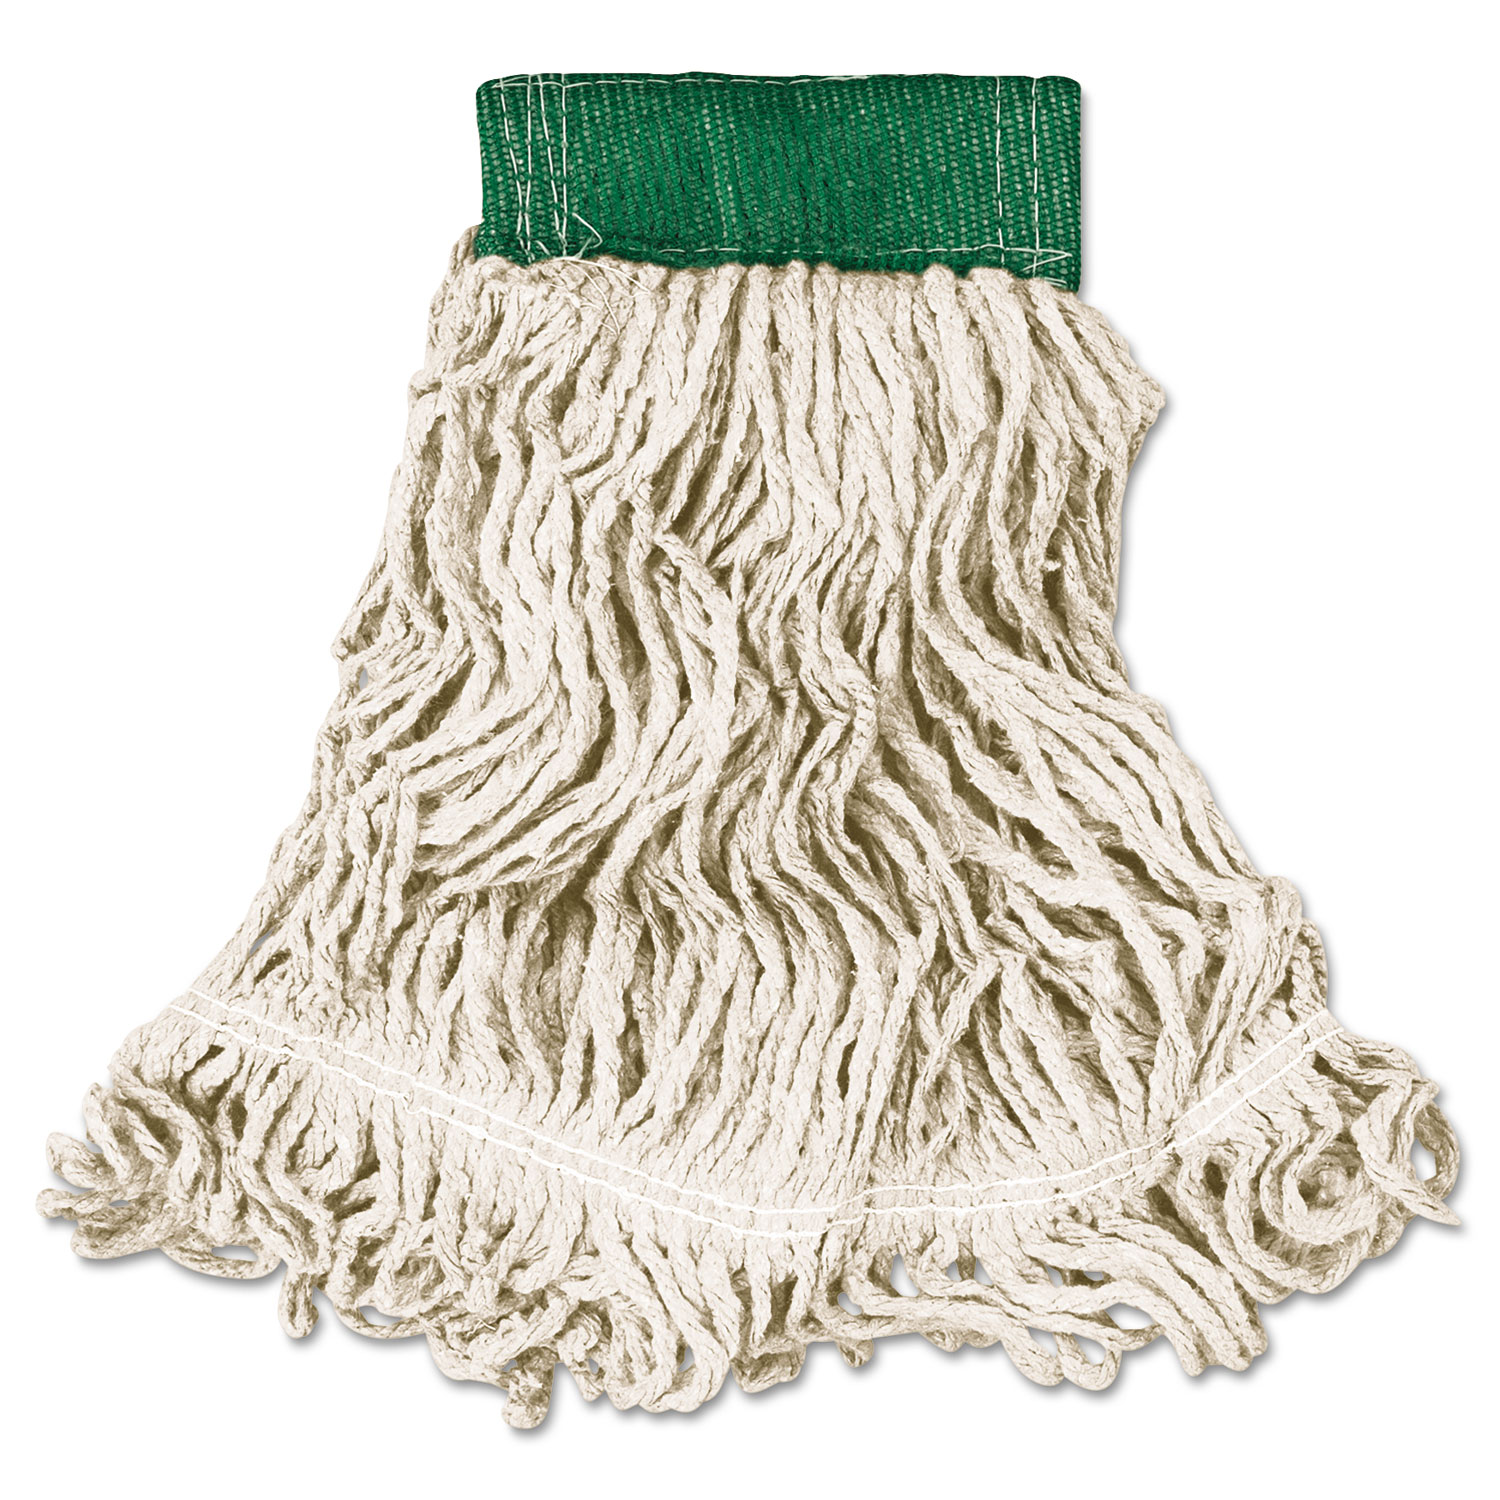  Rubbermaid Commercial FGD25206WH00 Super Stitch Looped-End Wet Mop Head, Cotton/Synthetic, Medium, Green/White (RCPD252WHI) 